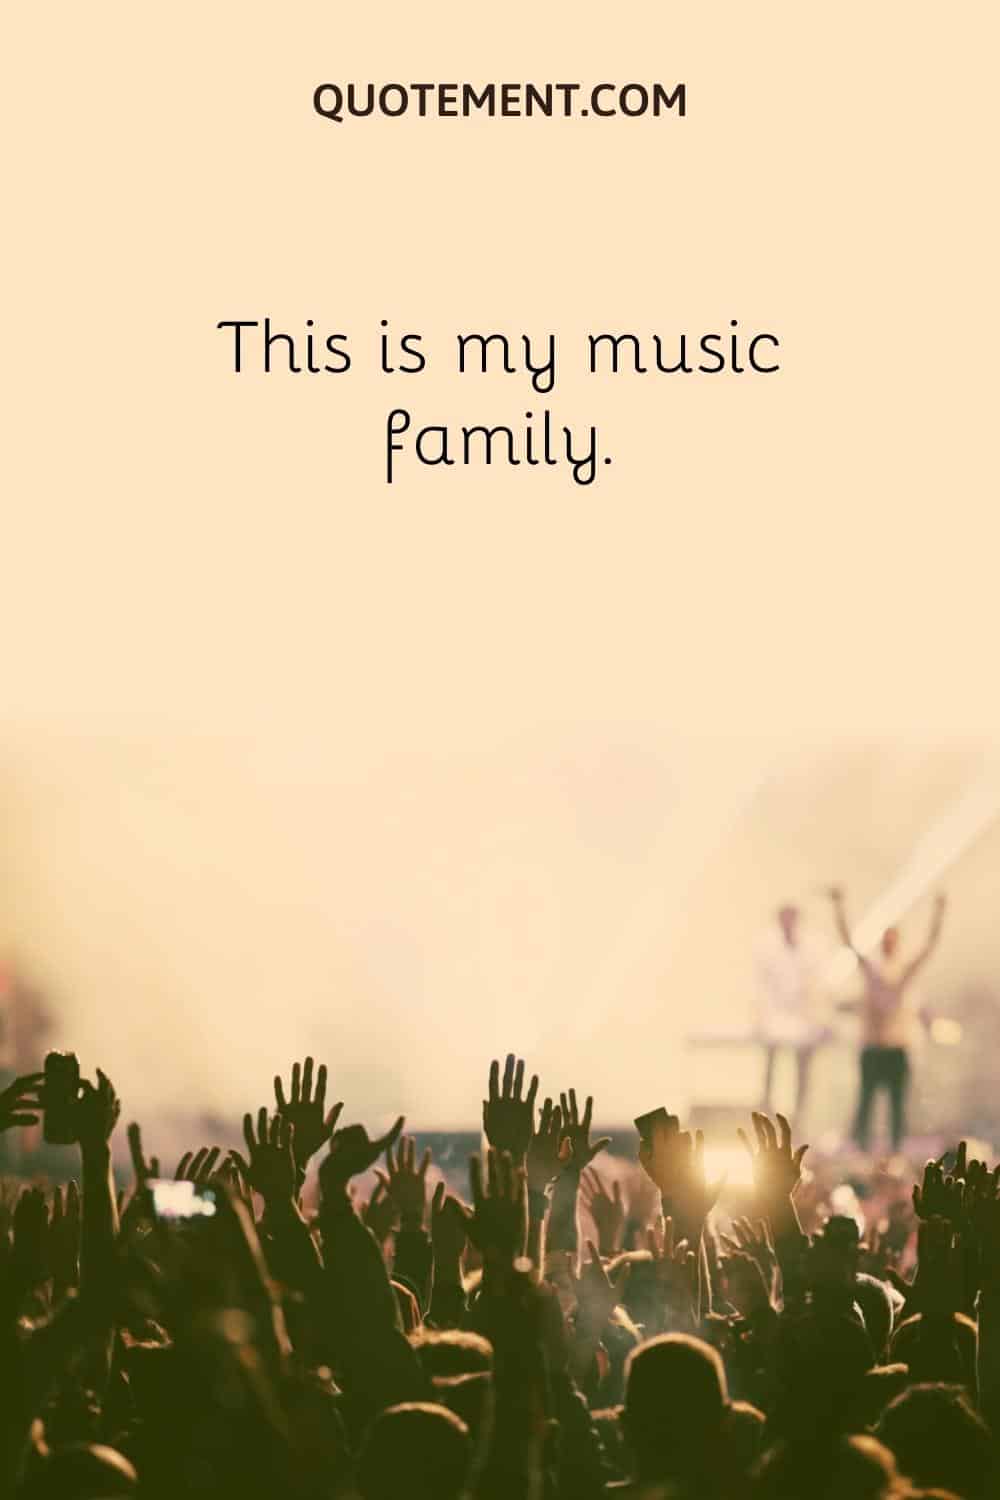 This is my music family.